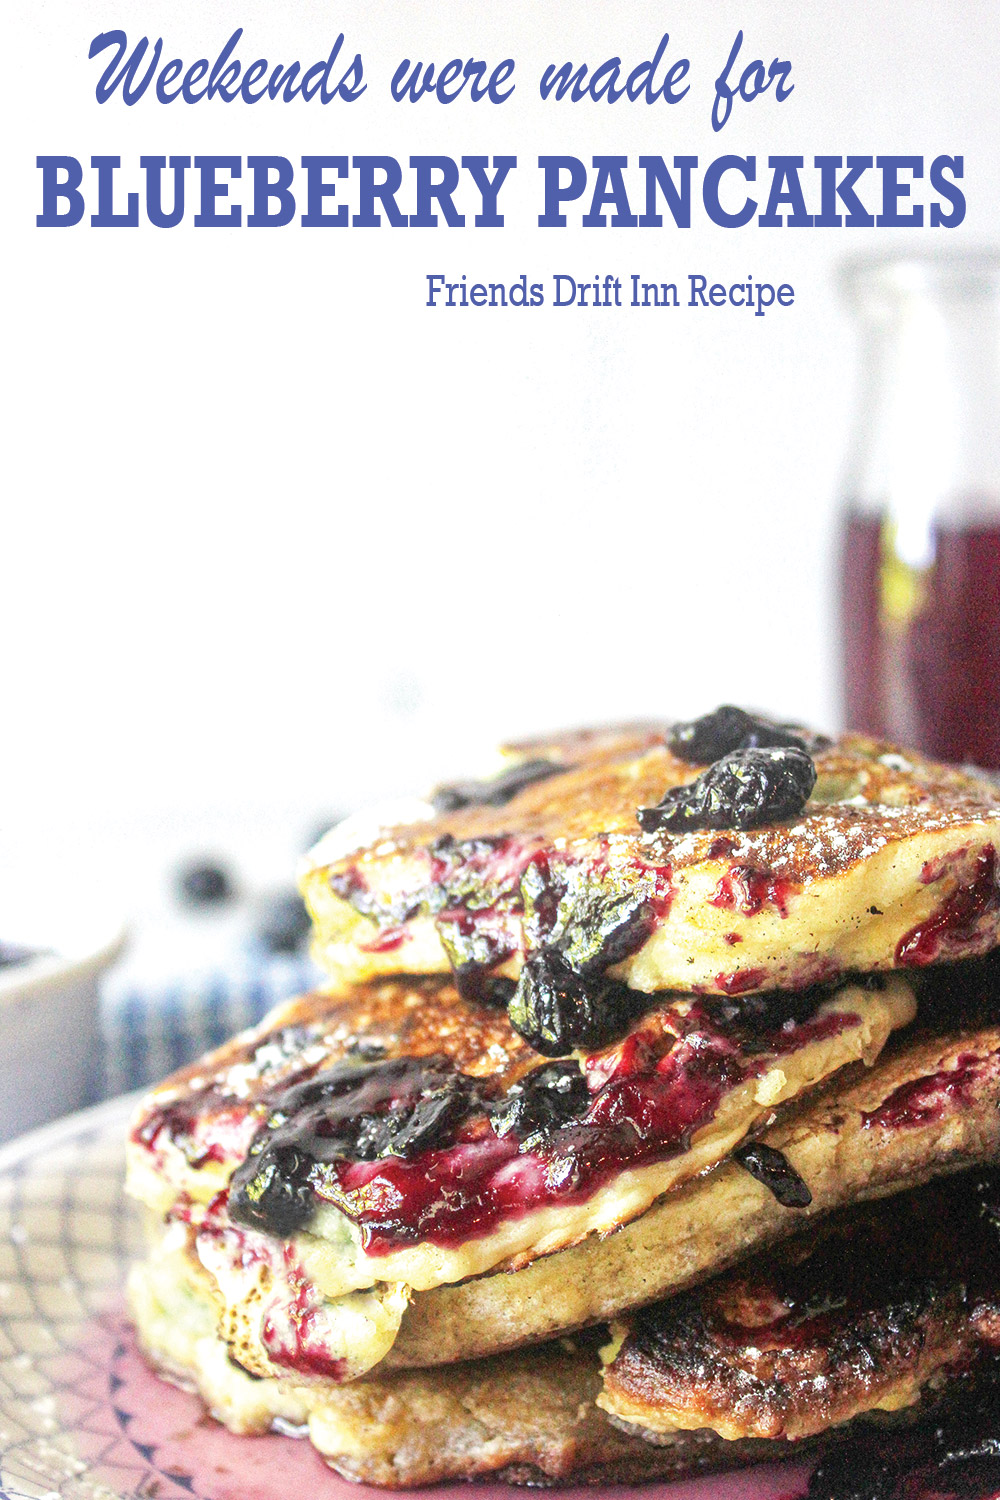 Stack of blueberry pancakes with blueberry jam syrup